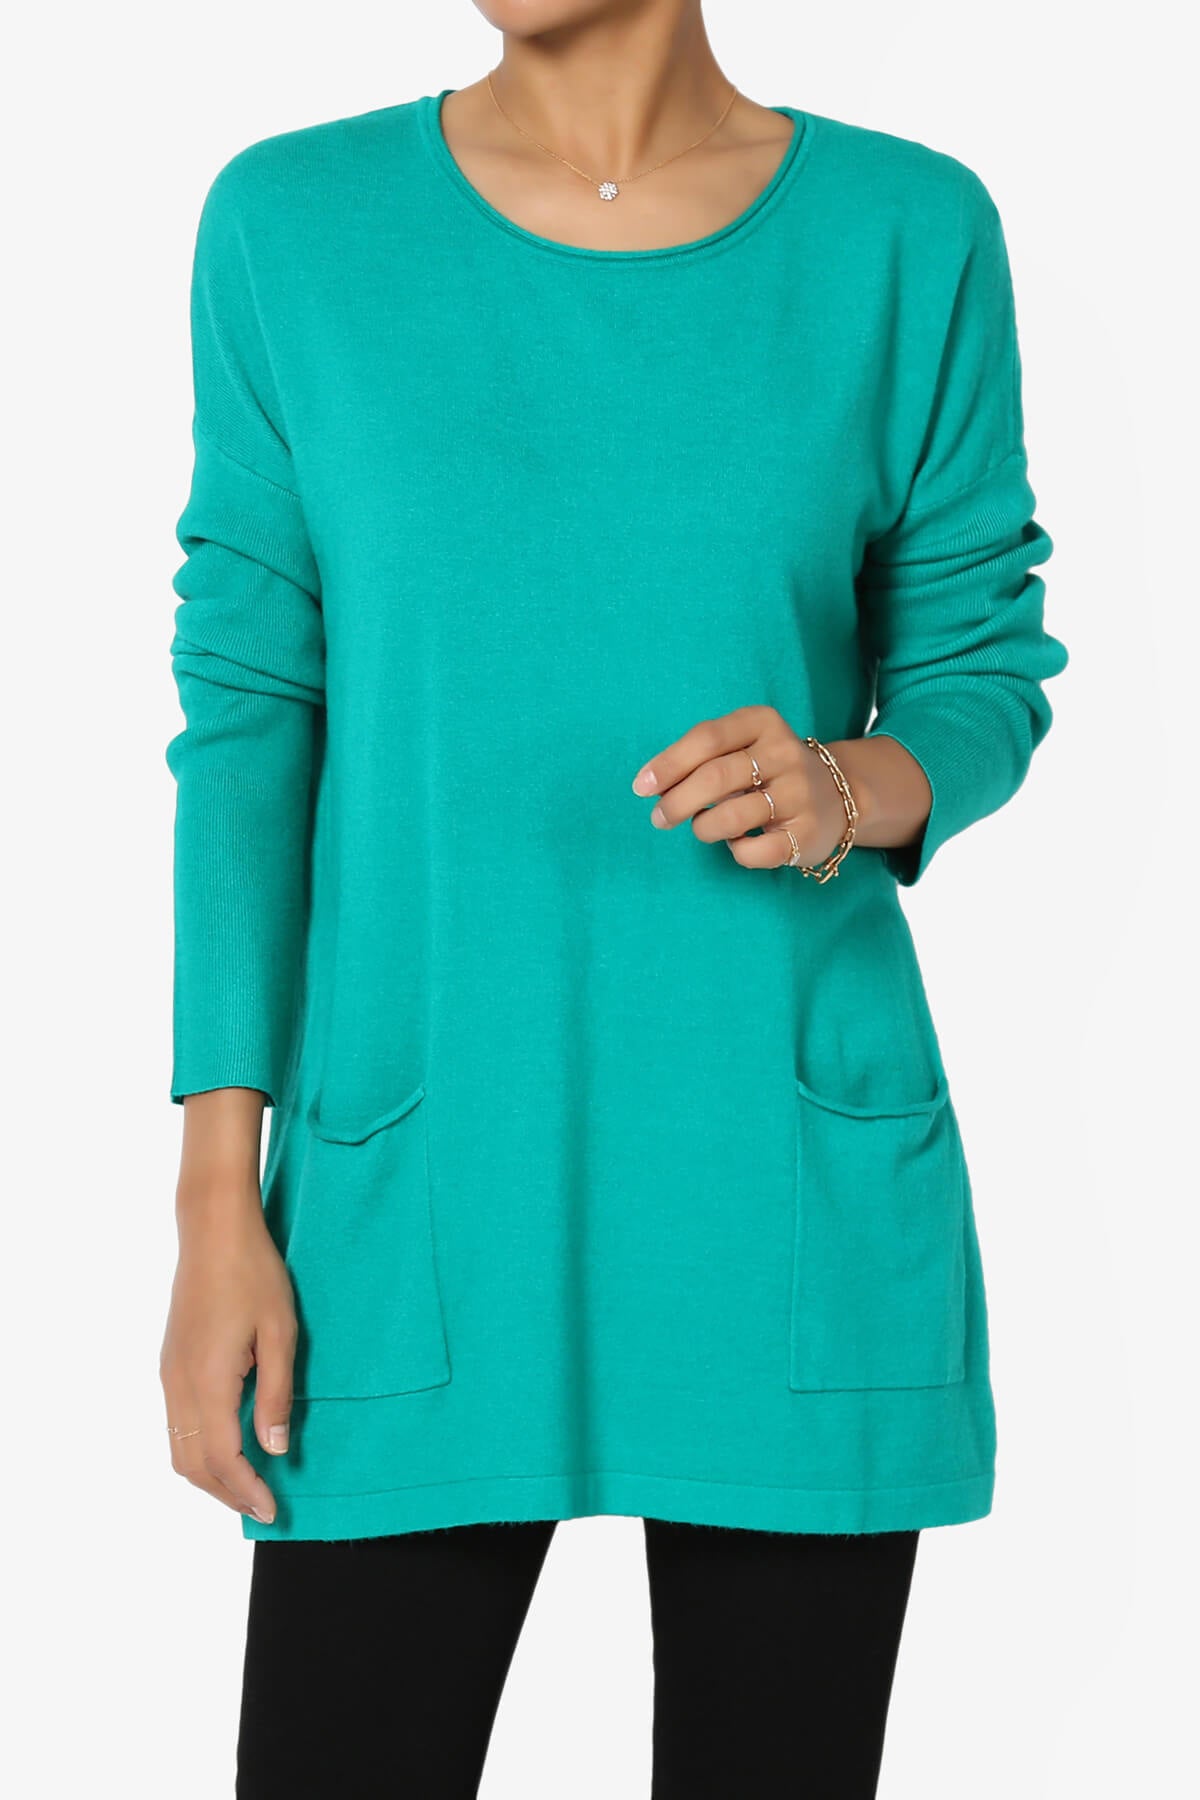 Brecken Pocket Long Sleeve Soft Knit Sweater Tunic TURQUOISE_1